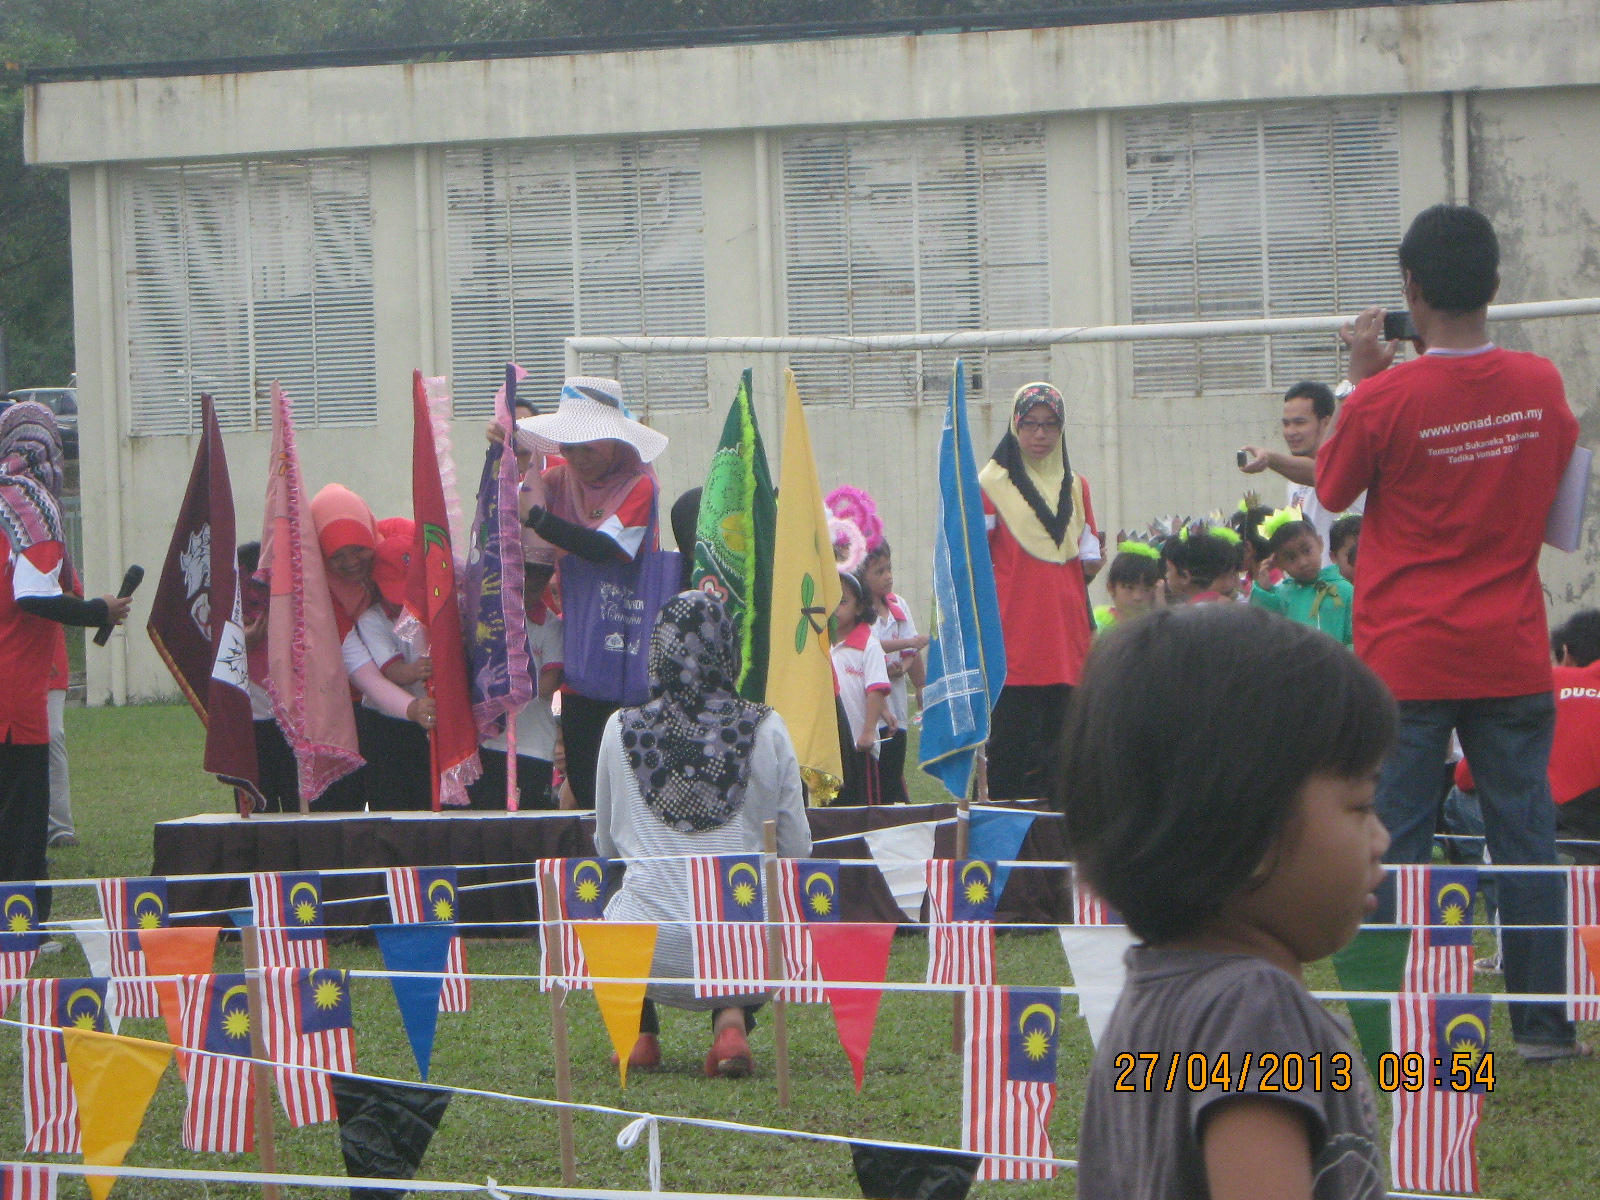 children play with large plastic flags at an outdoor soccer field